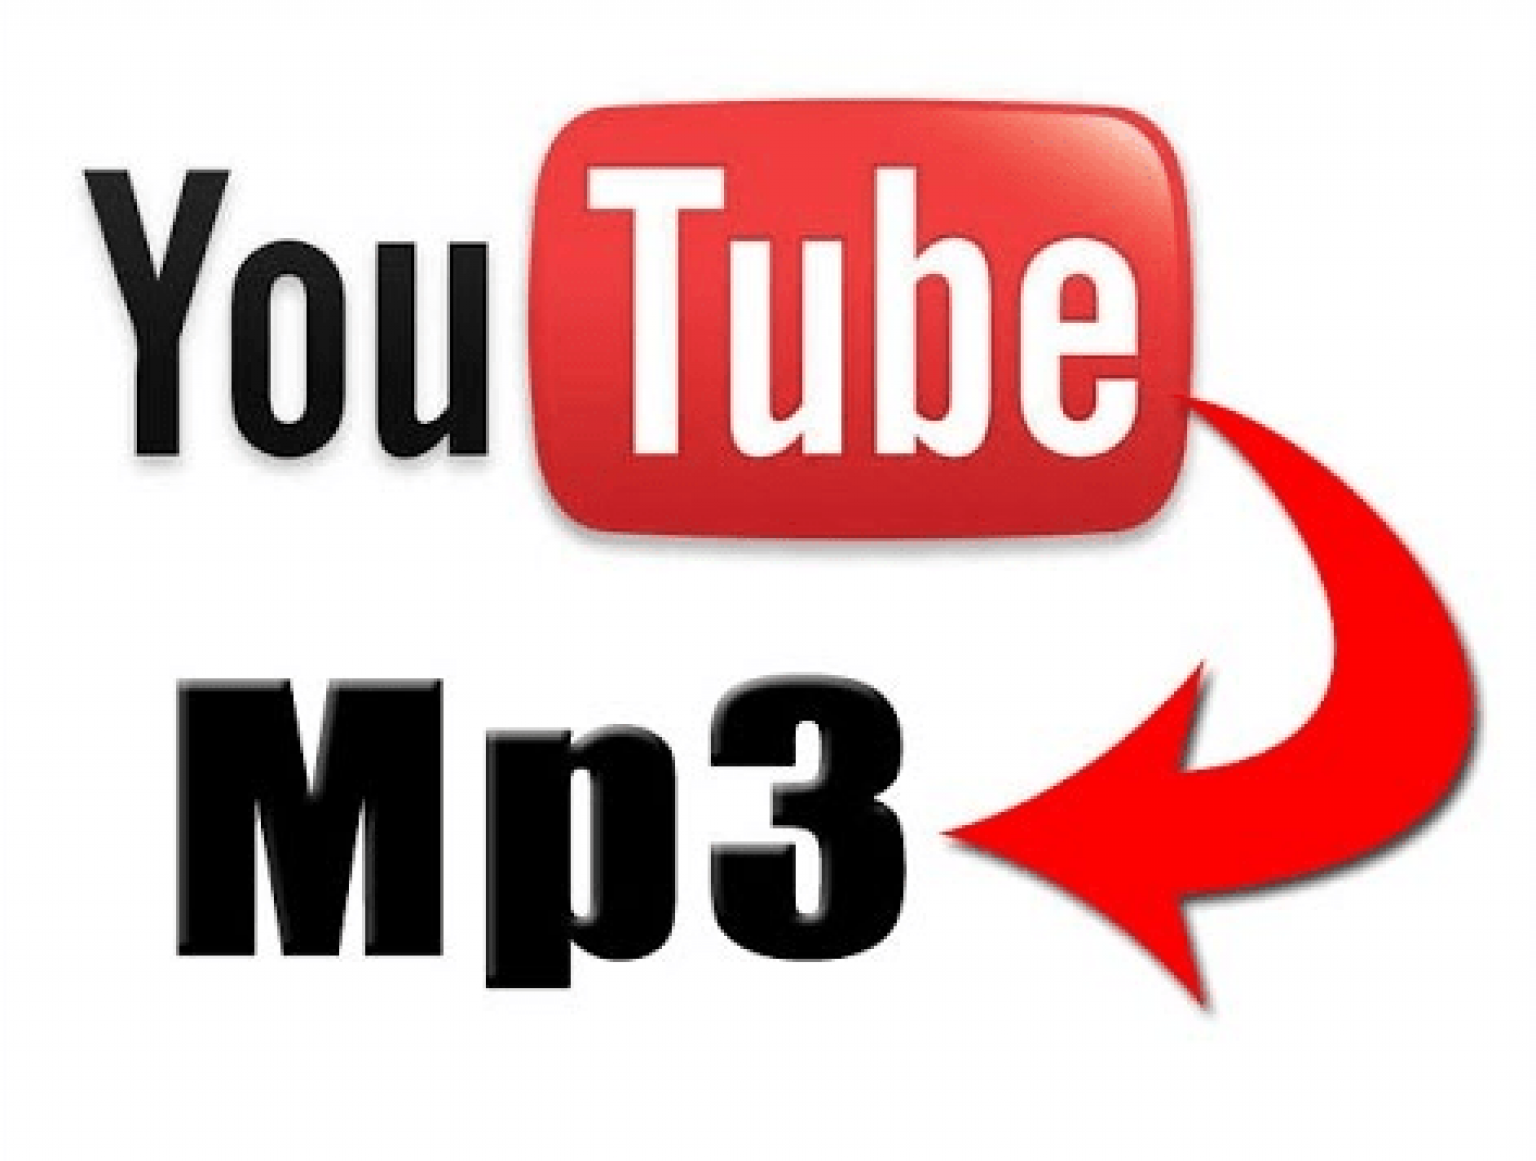 download youtube to mp3 converter for windows